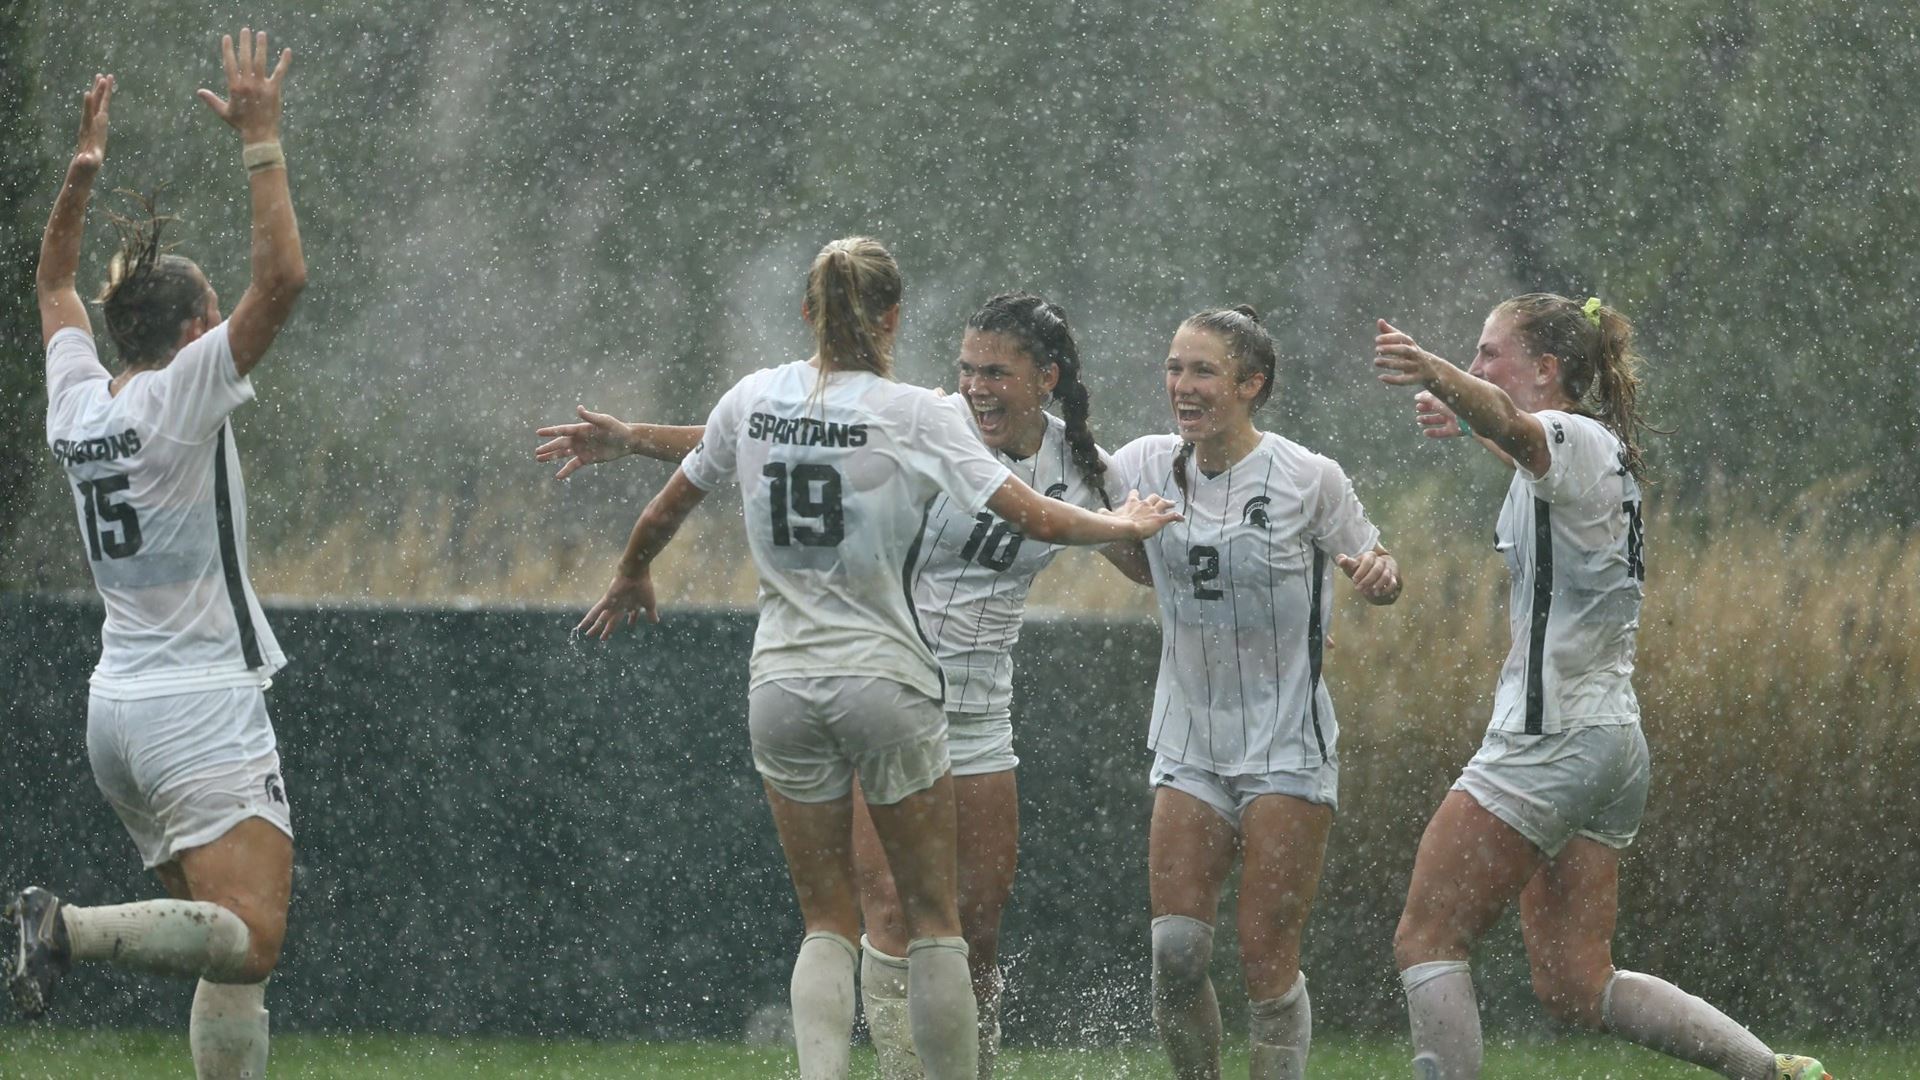 Evans' Hat Trick Lifts Spartans To Upset Of #19 Colorado